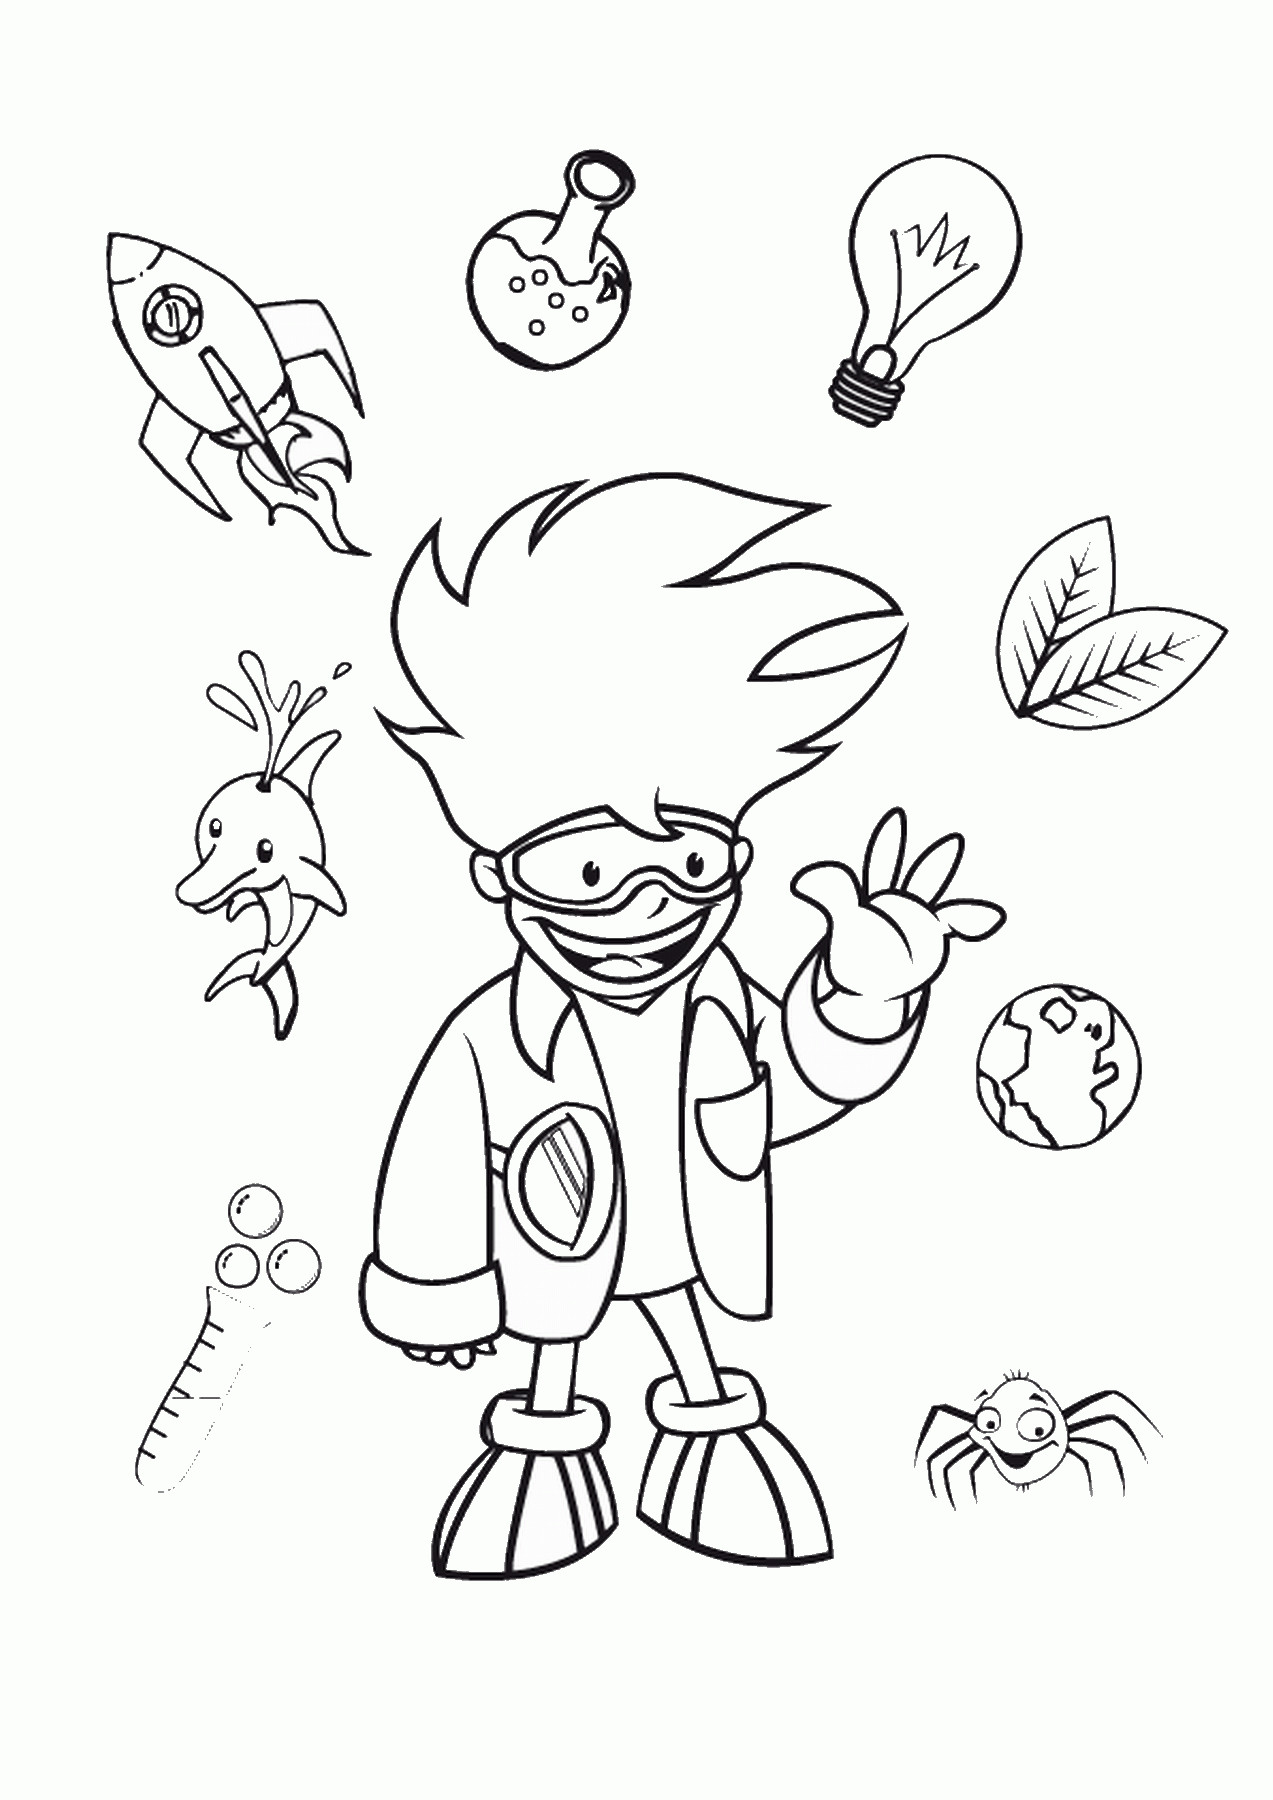 Scientist Coloring Sheet
 Science Coloring Pages